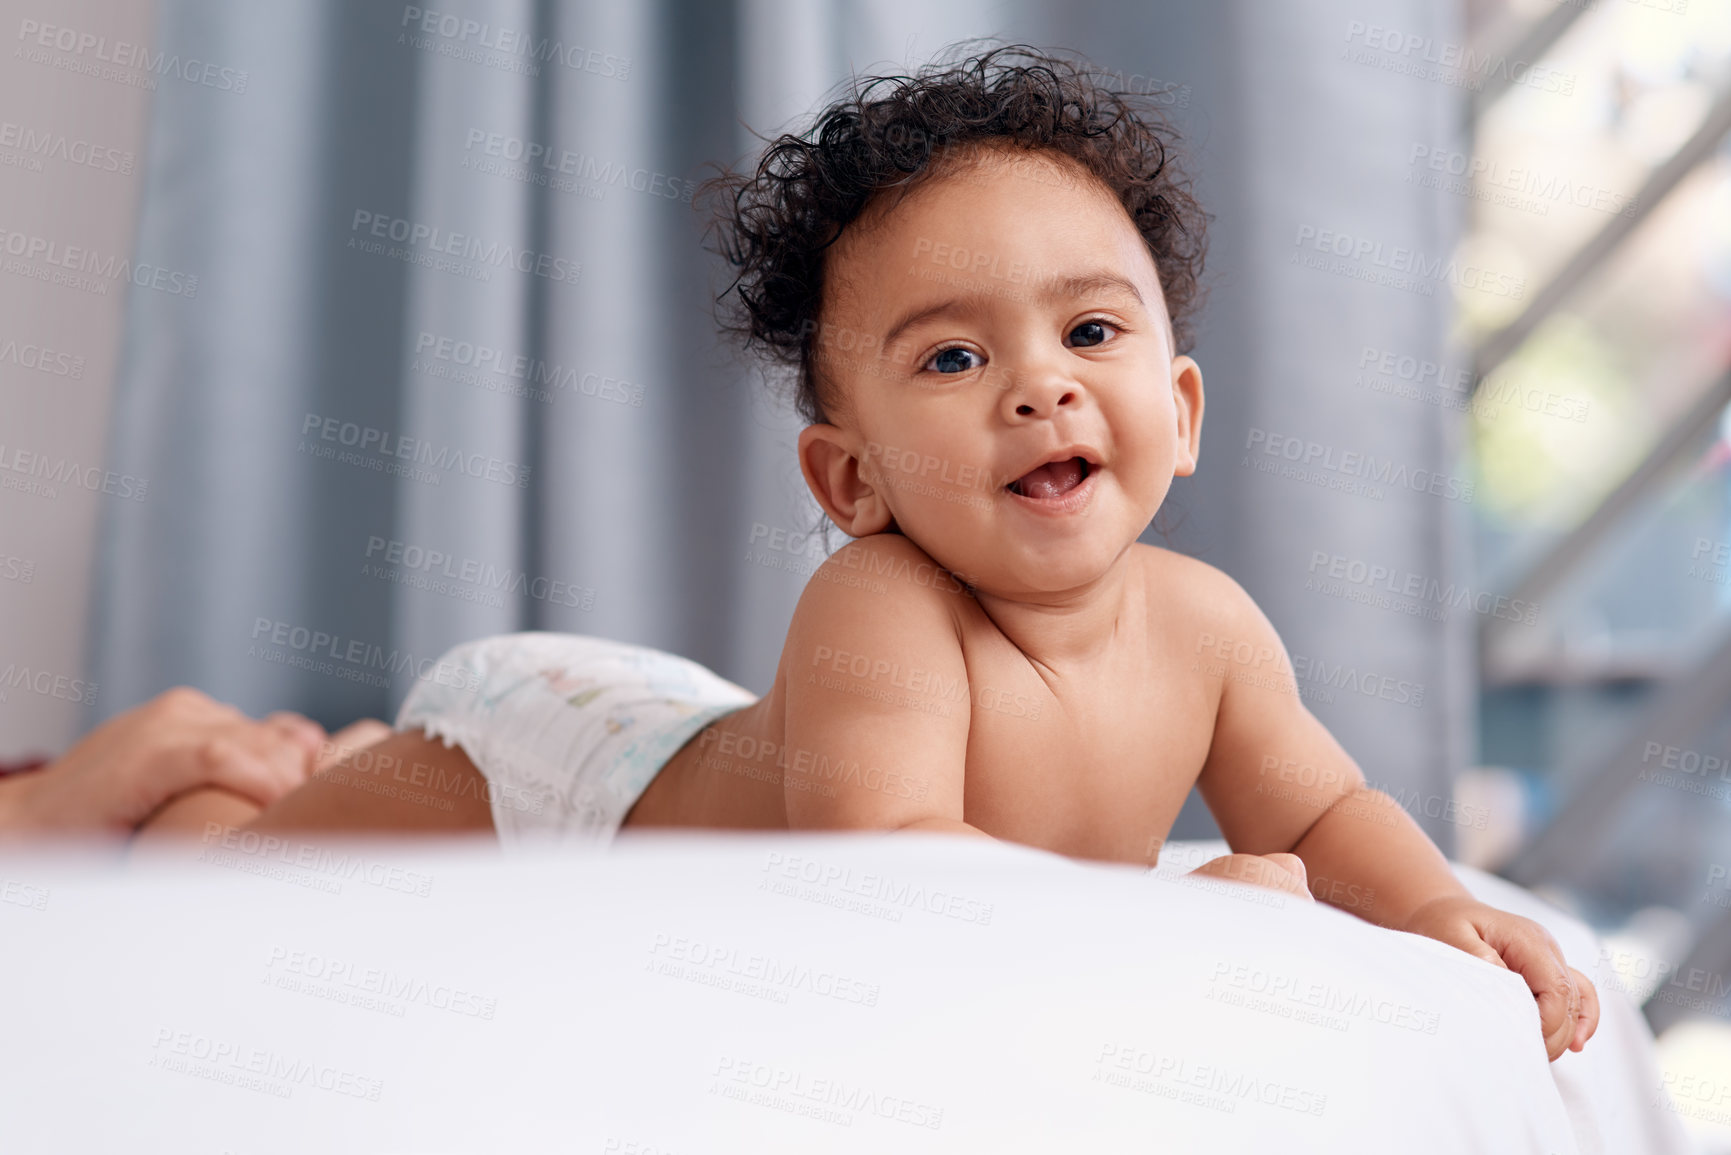 Buy stock photo Shot of an adorable baby boy on the bed at home